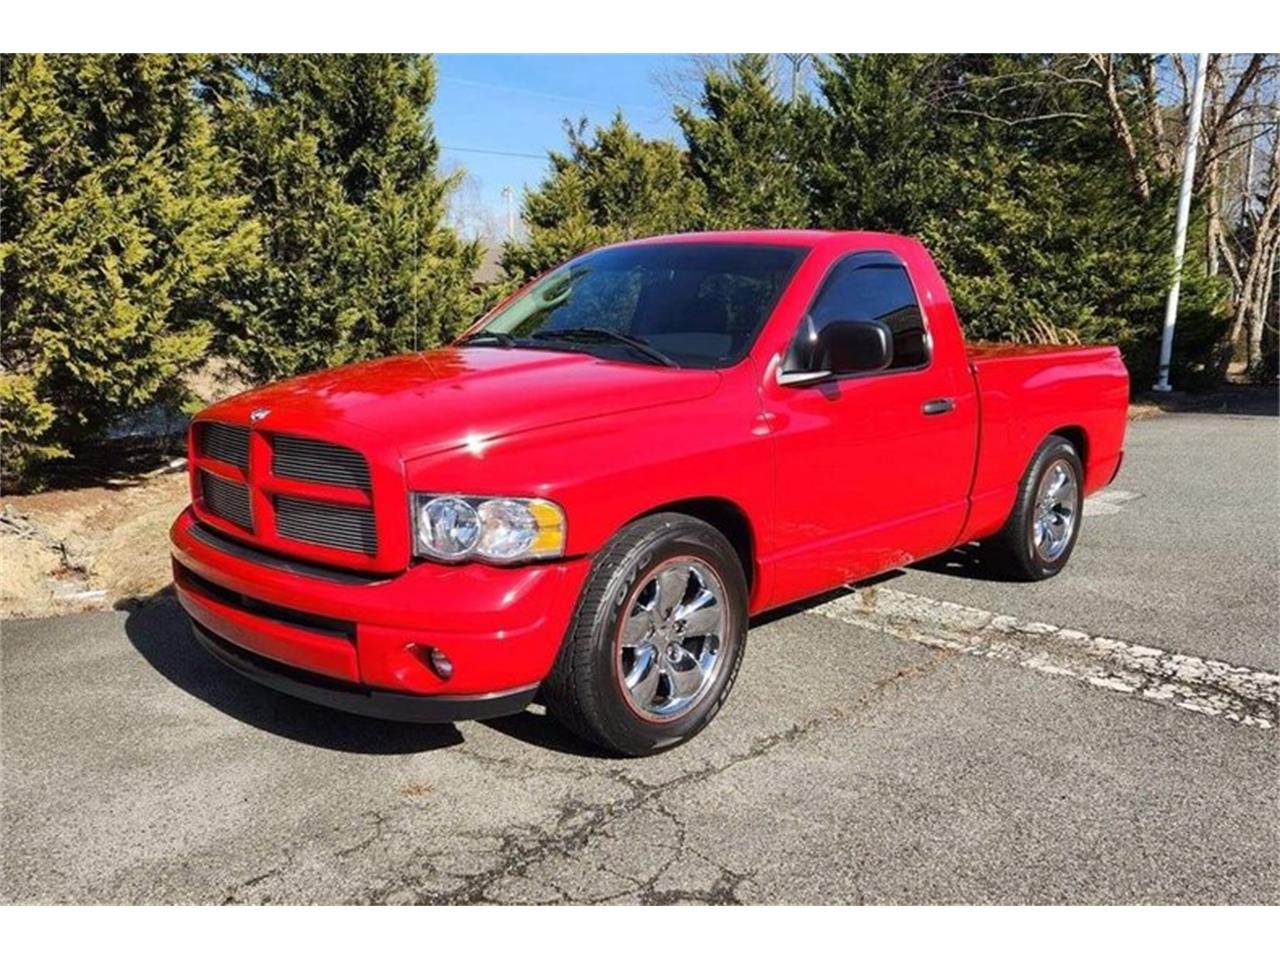 For Sale at Auction: 2003 Dodge Ram in Greensboro, North Carolina for sale in Greensboro, NC